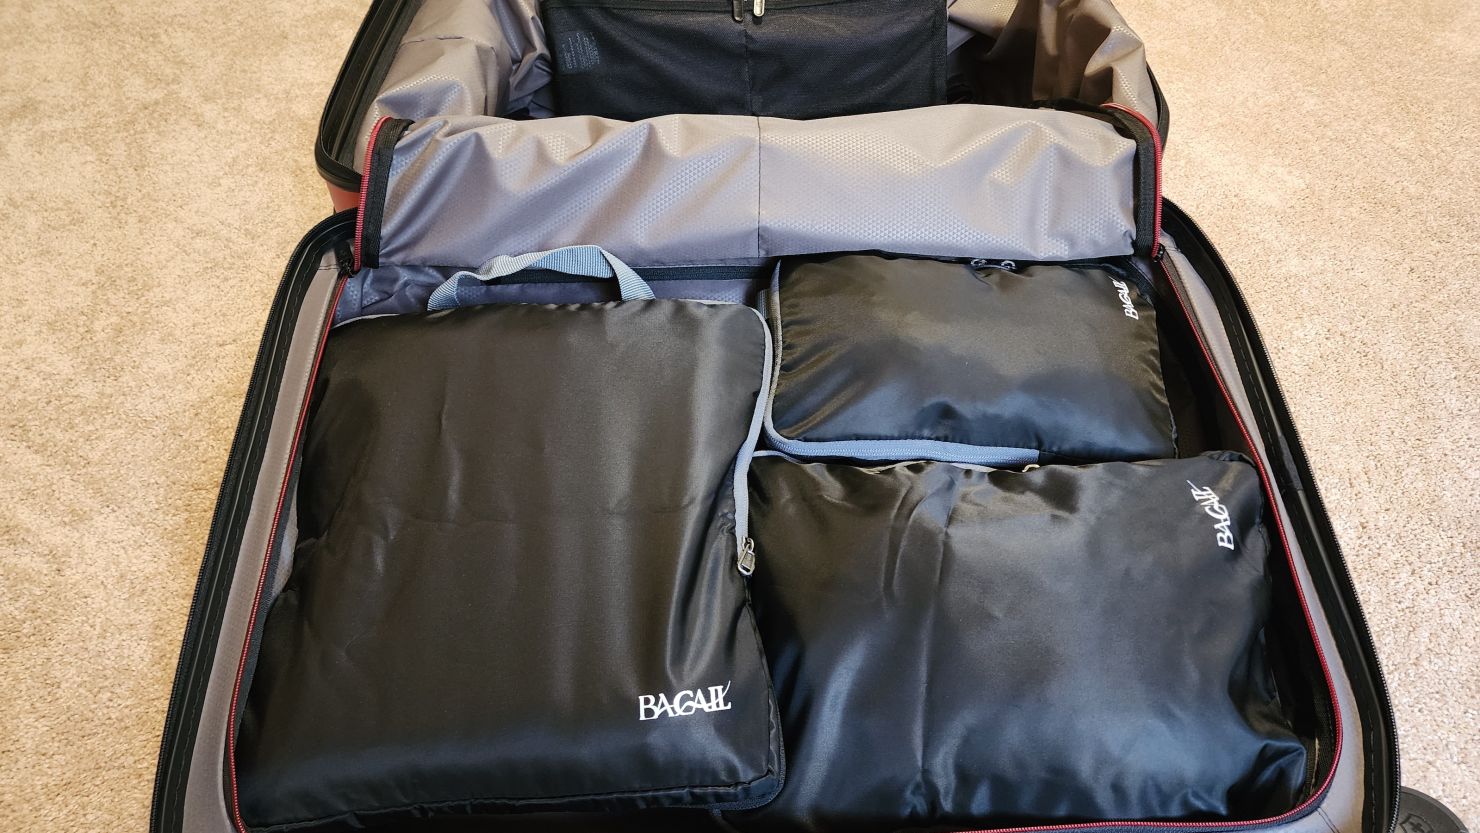 What's Better Than Compression Bags And Packing Cubes? Compression